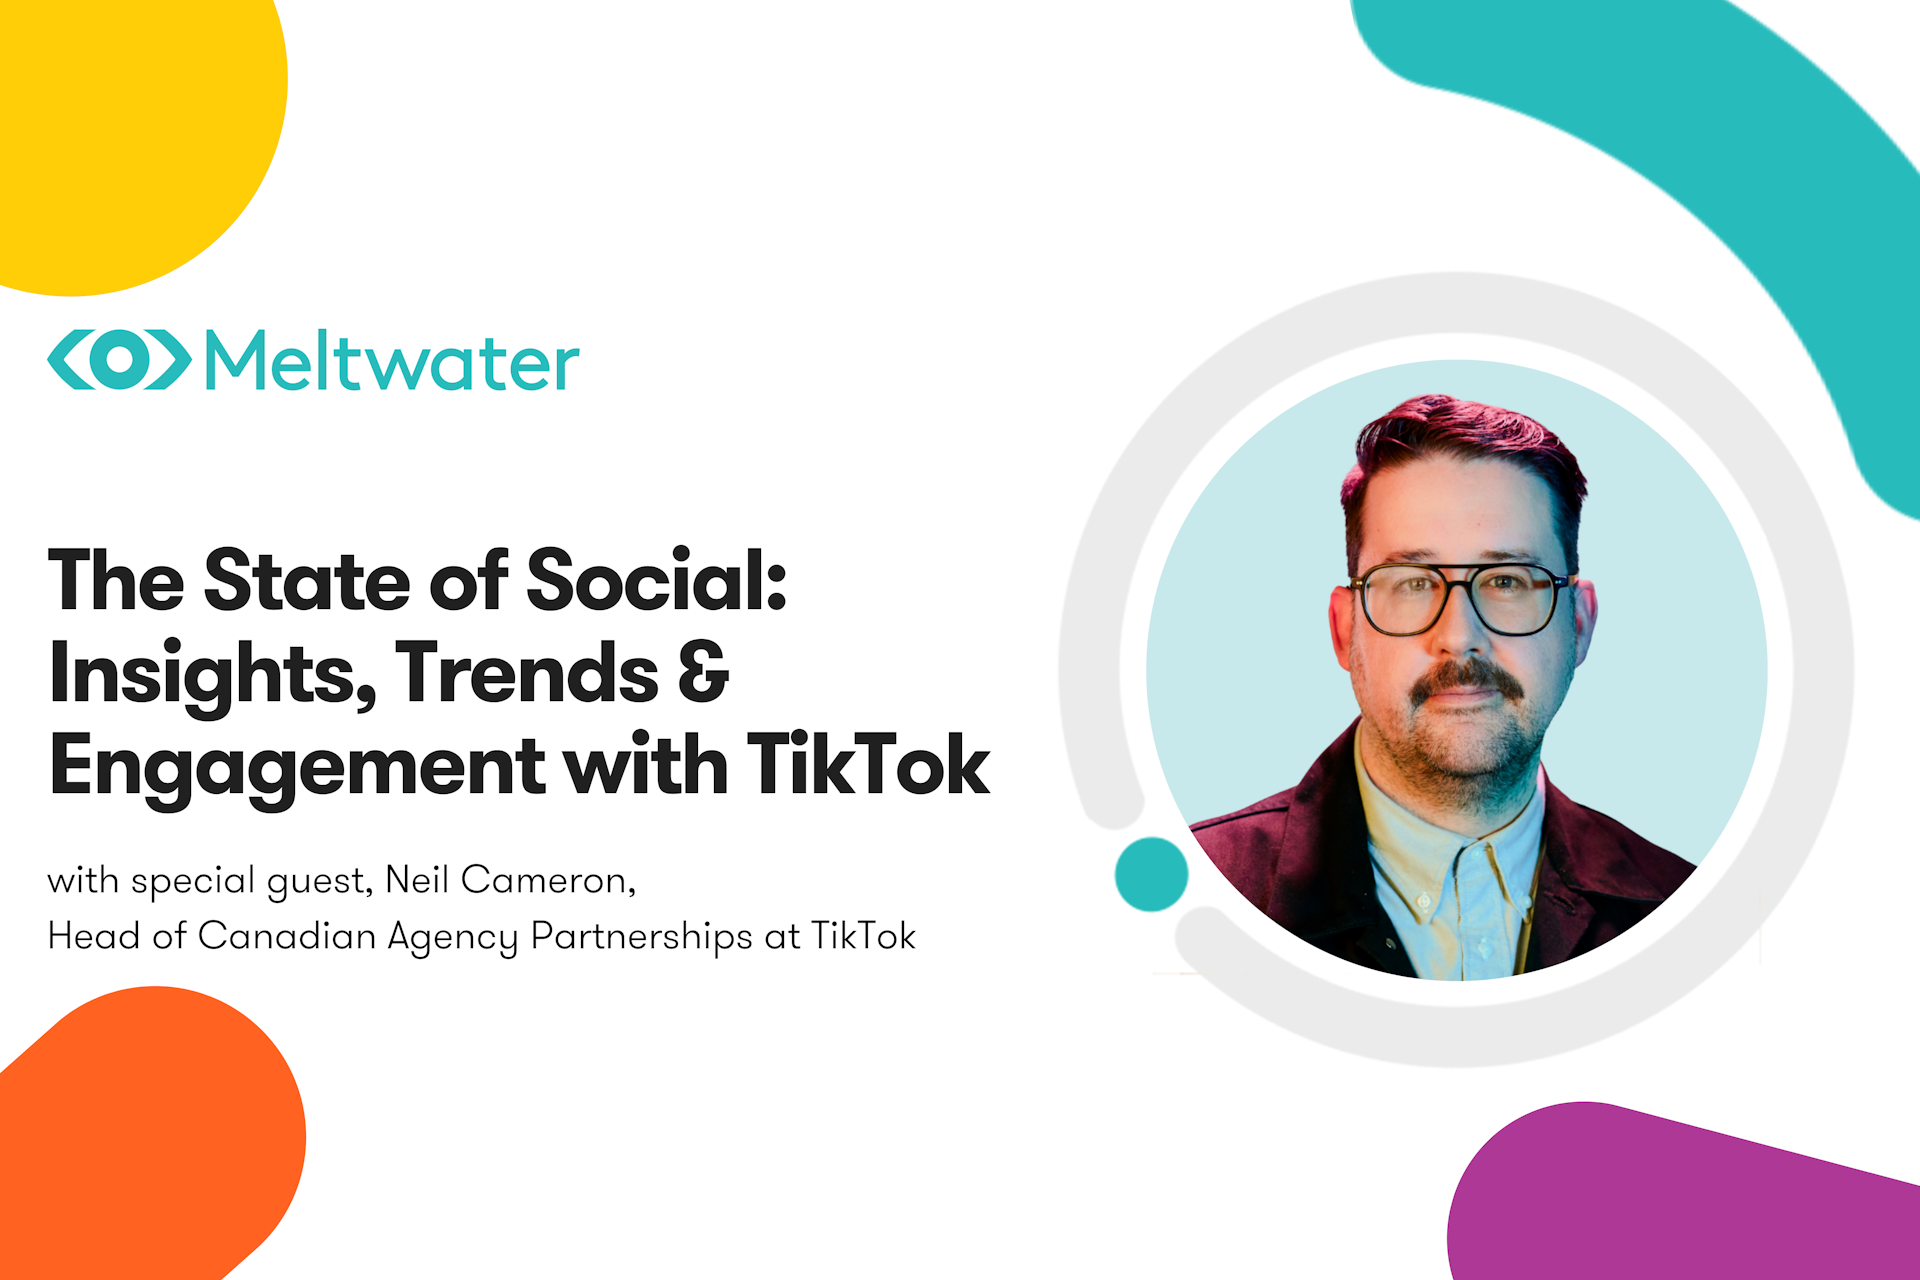 The State of Social: Insights, Trends & Engagement with TikTok Webinar